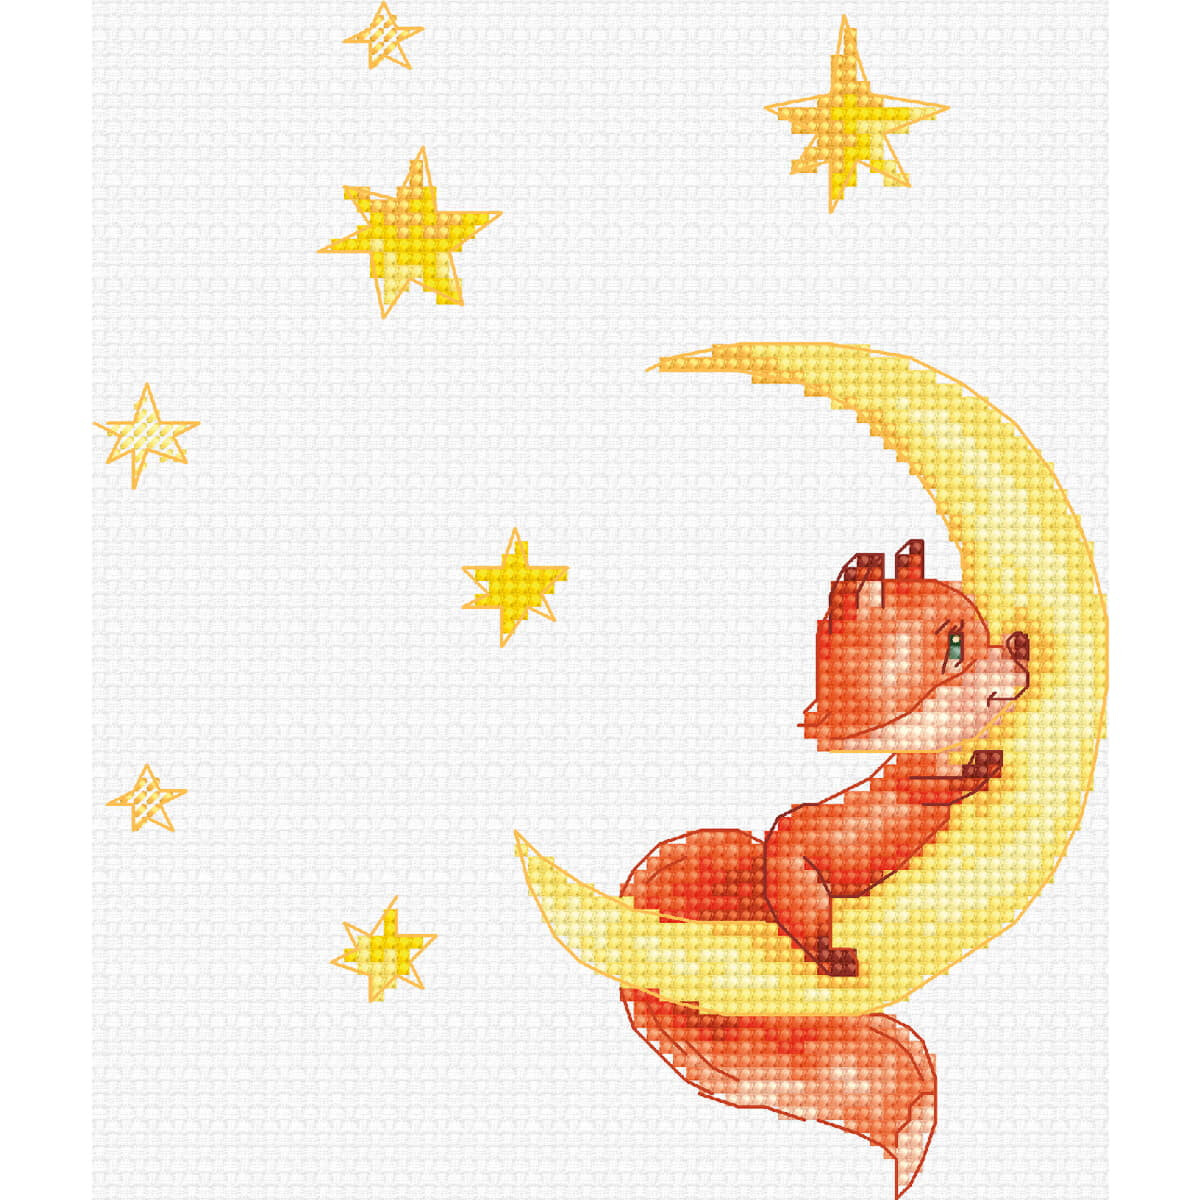 A cross stitch design showing an orange fox with upturned...